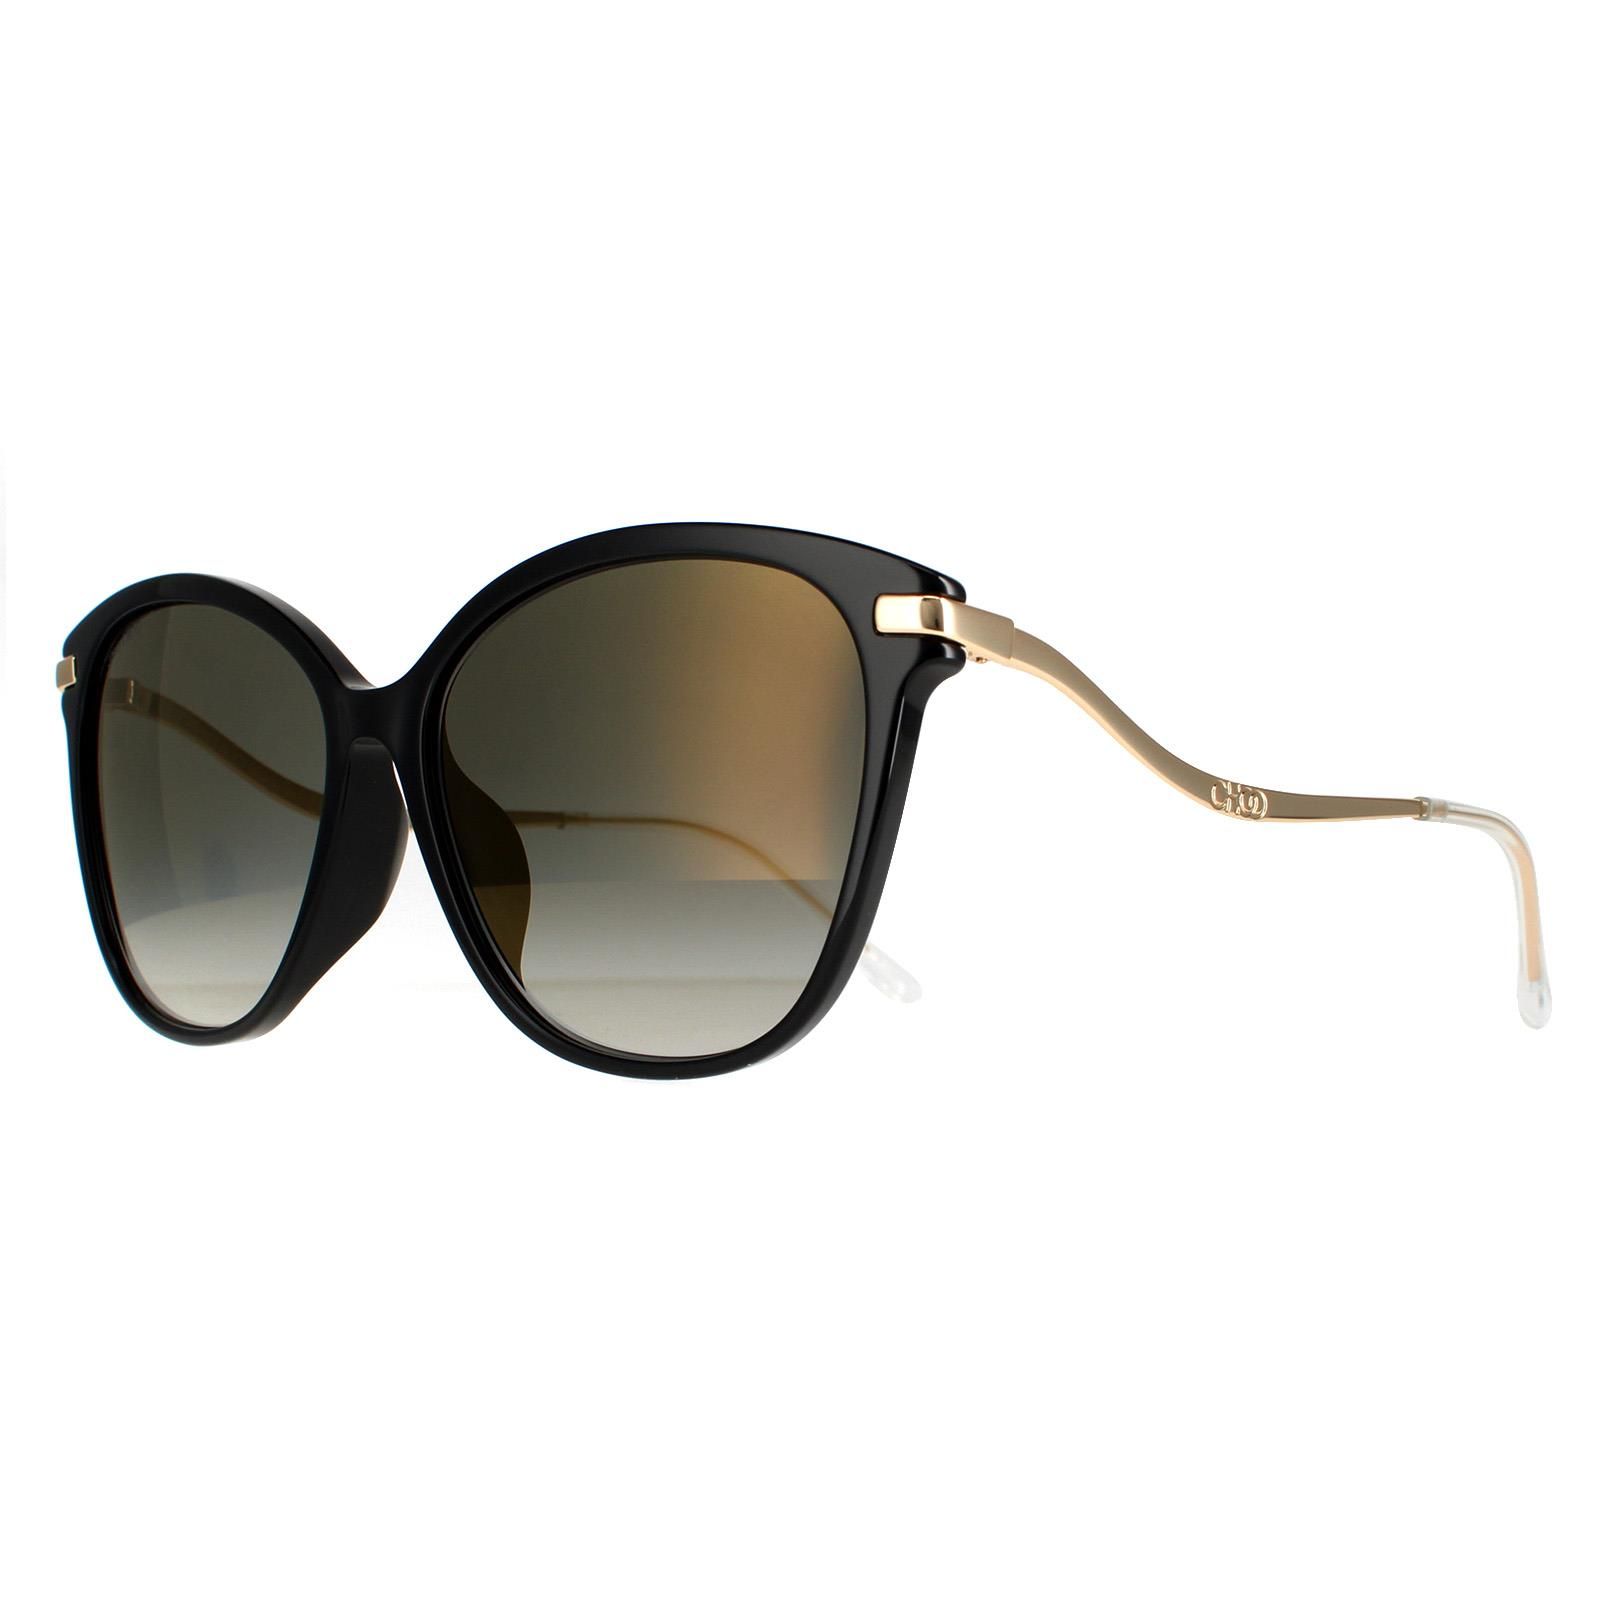 Jimmy Choo CatEye Womens Black Grey Gradient Gold Mirror Peg/F/S  Jimmy Choo are a cat eye style crafted from lightweight acetate. The Jimmy Choo logo is engraved into the wavy designed temples for brand authenticity